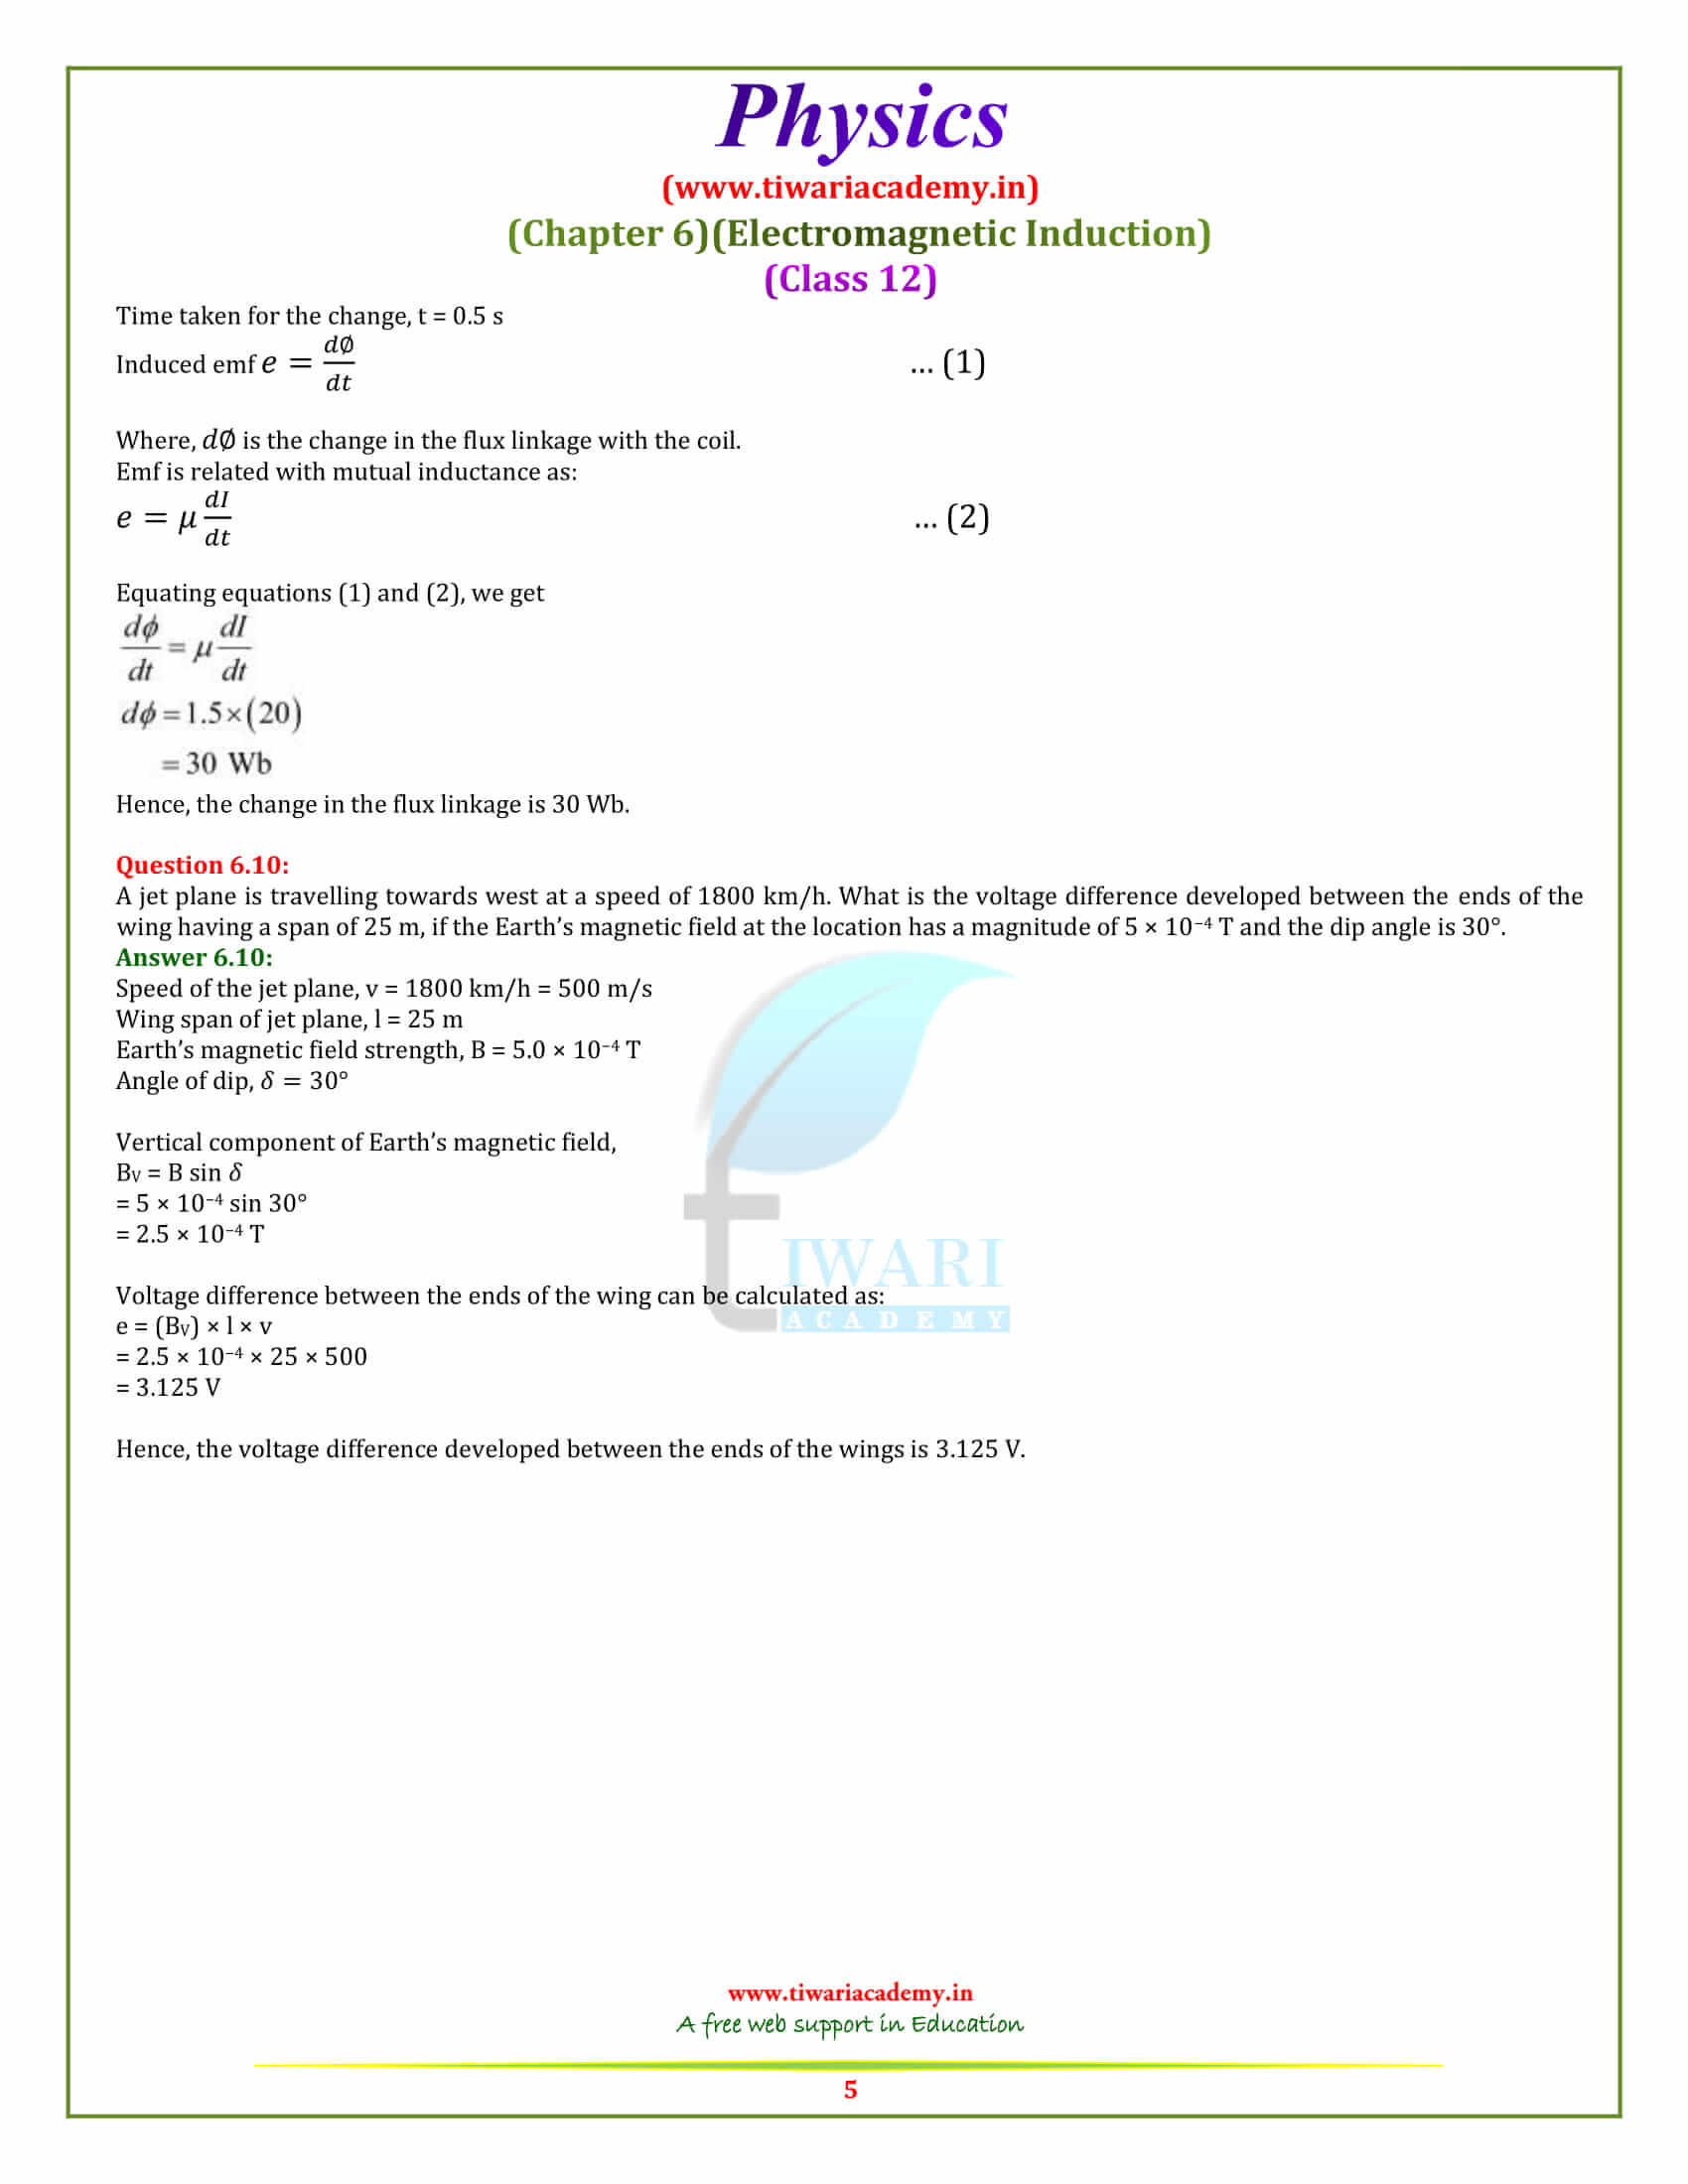 NCERT Solutions for Class 12 Physics Chapter 6 Electromagnetic Induction for +2